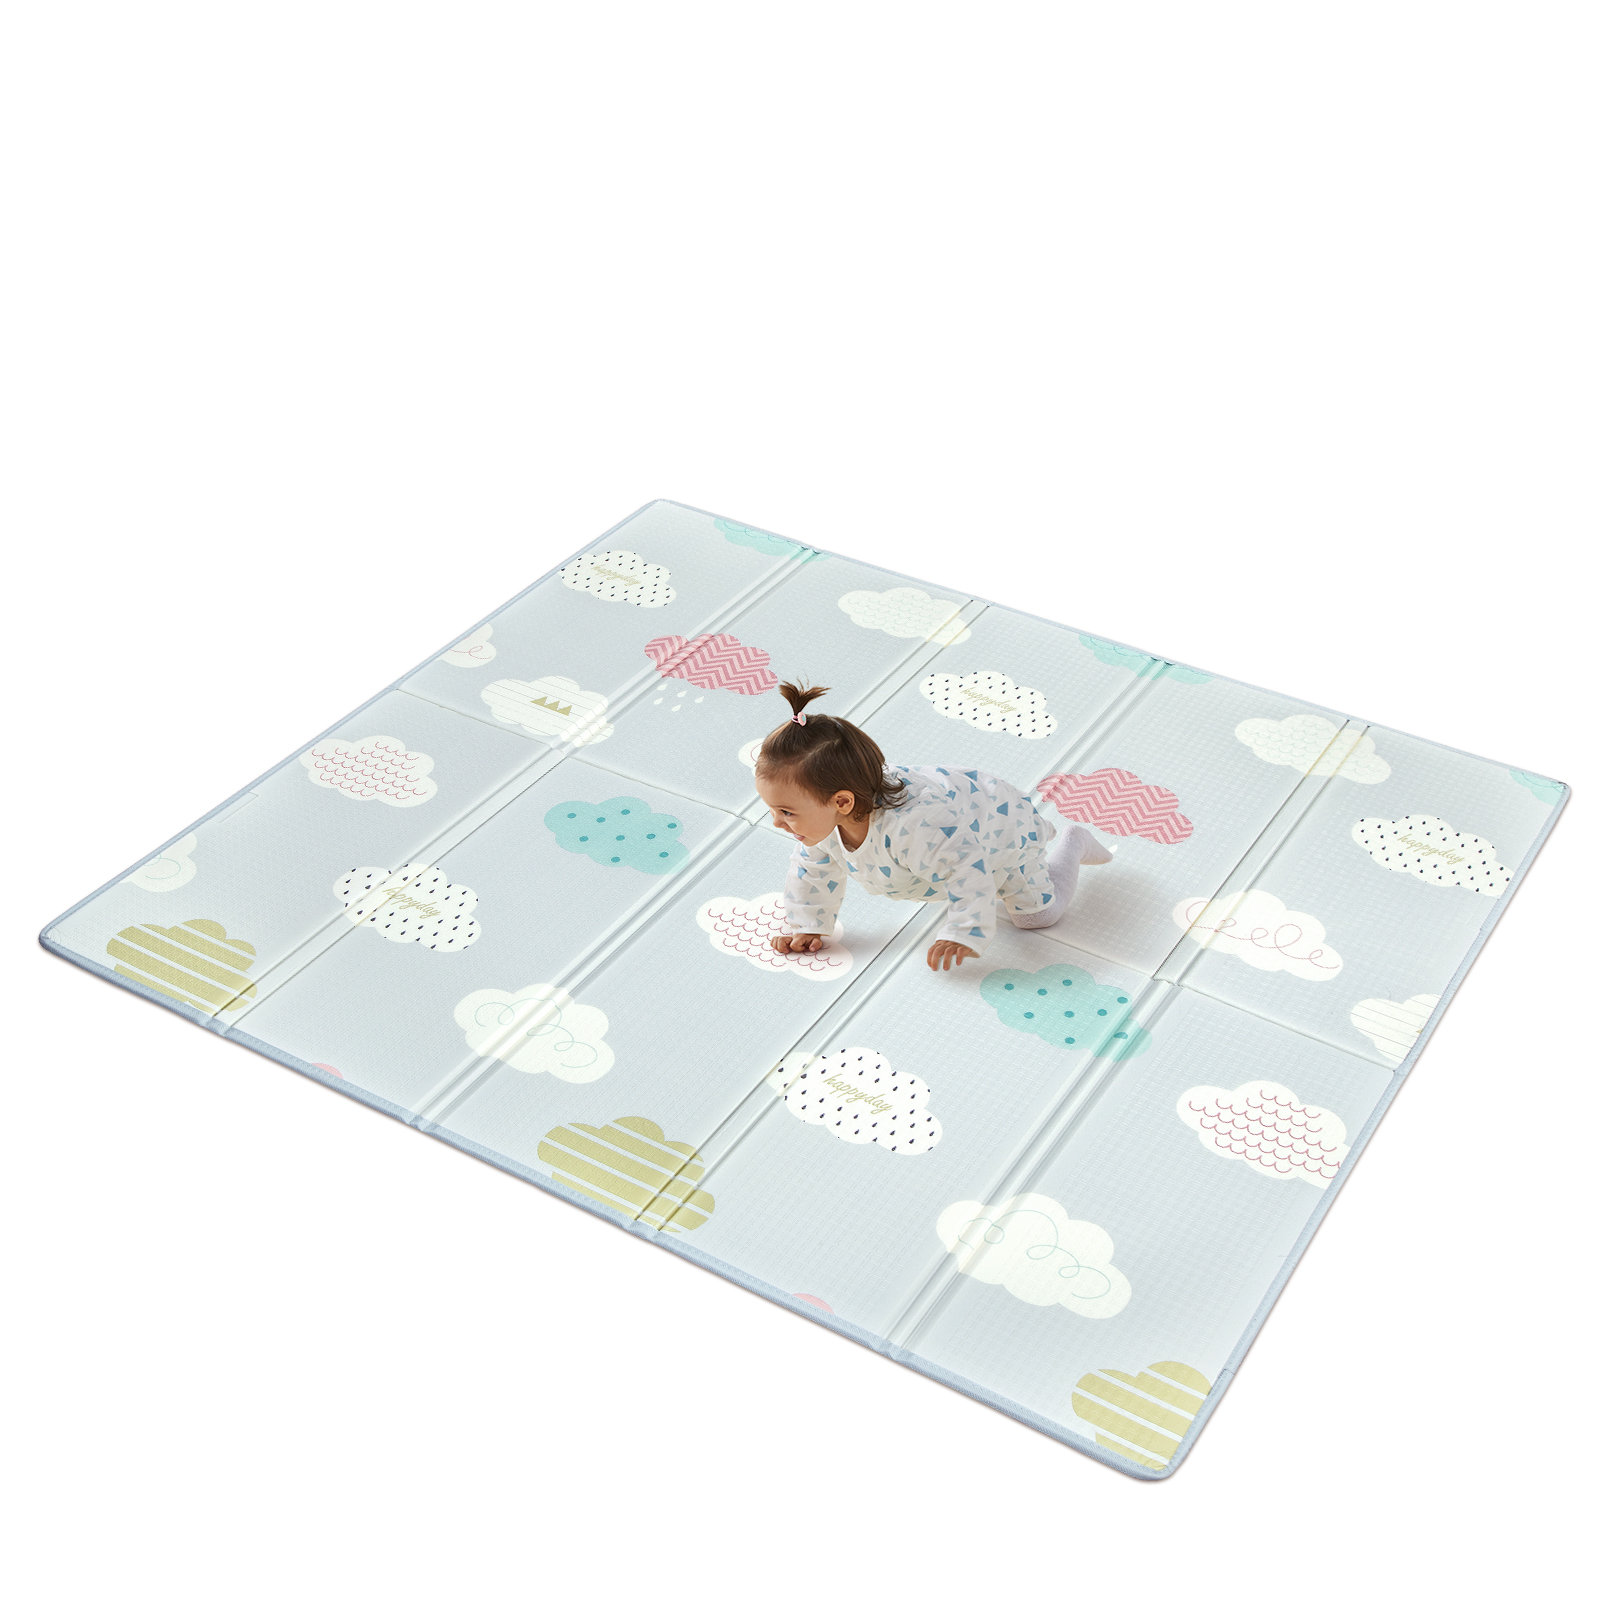 Bear Trip Portable Extra Large Foldable Play Mat, Waterproof Easy